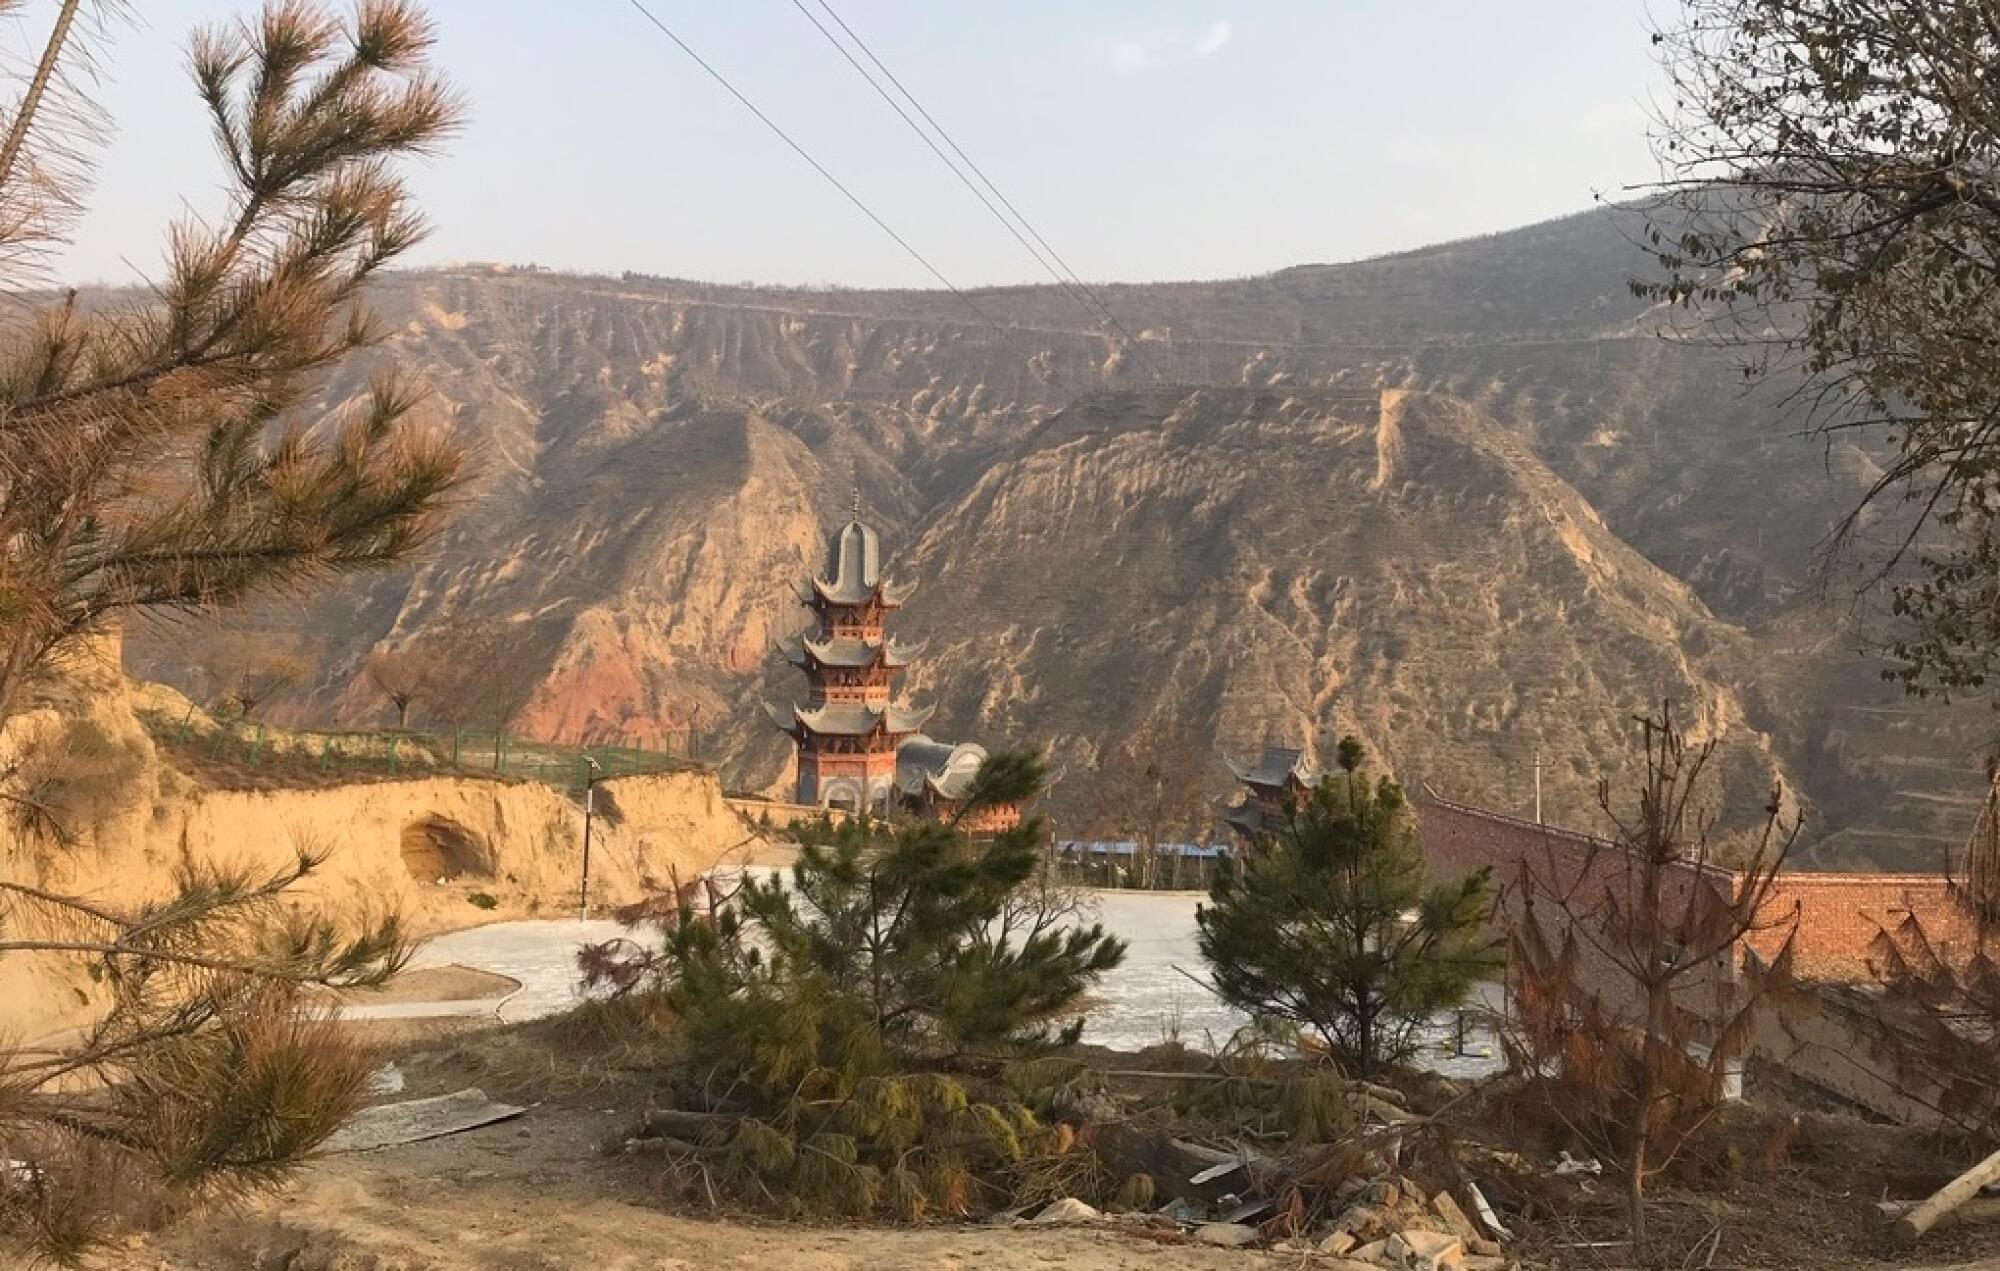 An old Islamic-Chinese tower stands over the Dongxiang minority village of Bulengou.